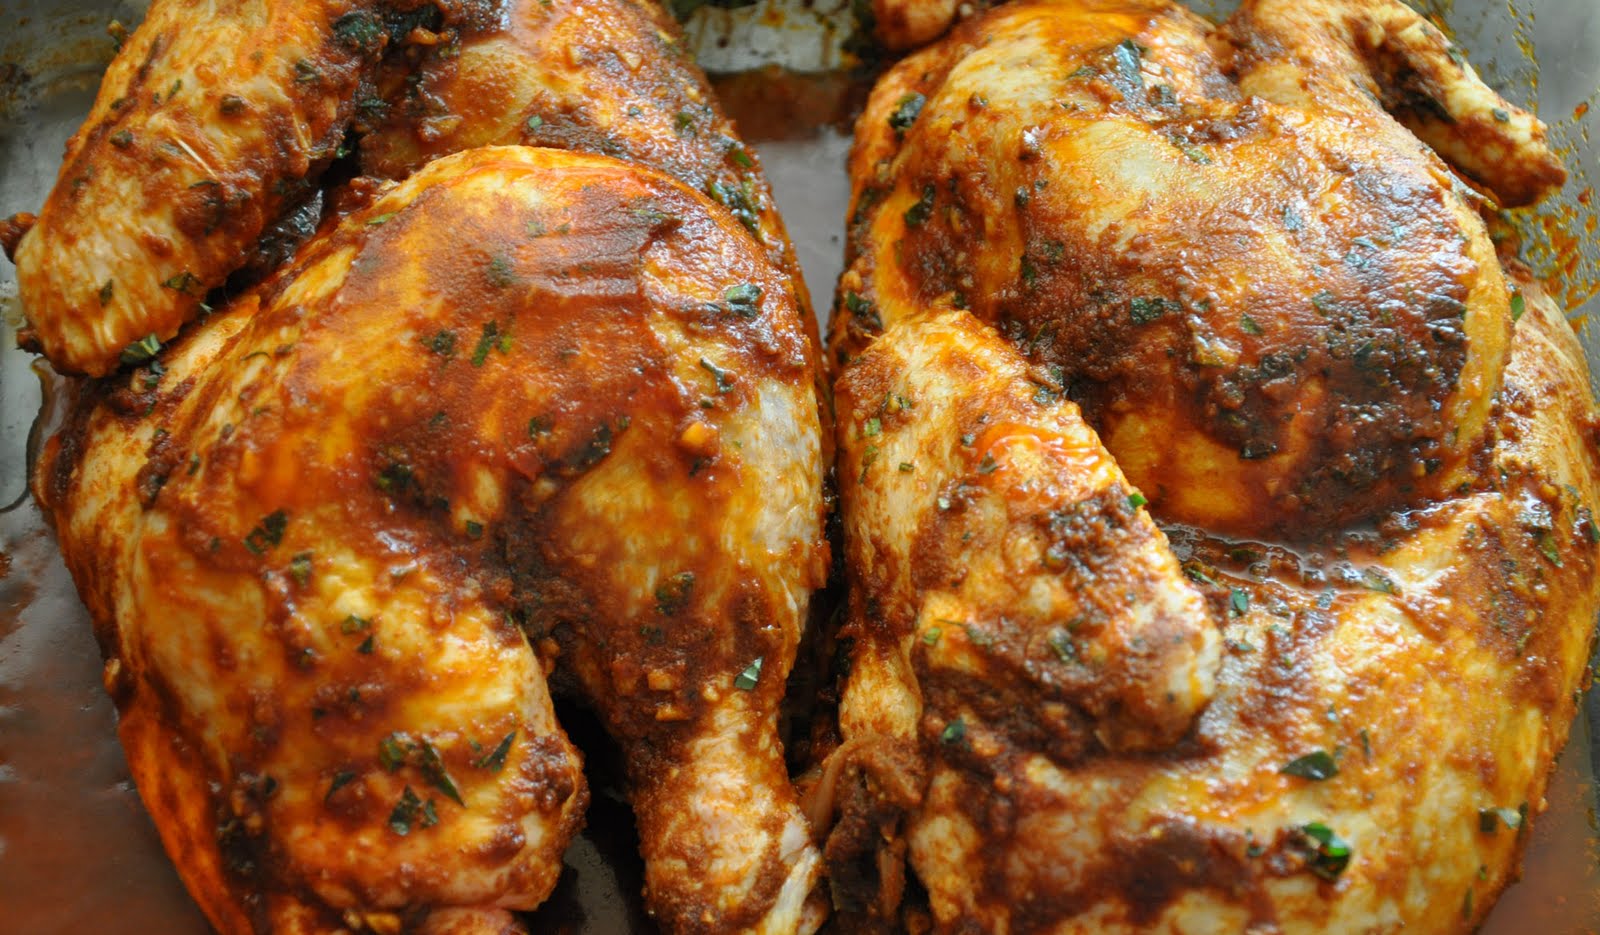 Fire and Food: Ben's Peri-Peri Chicken in the Weber